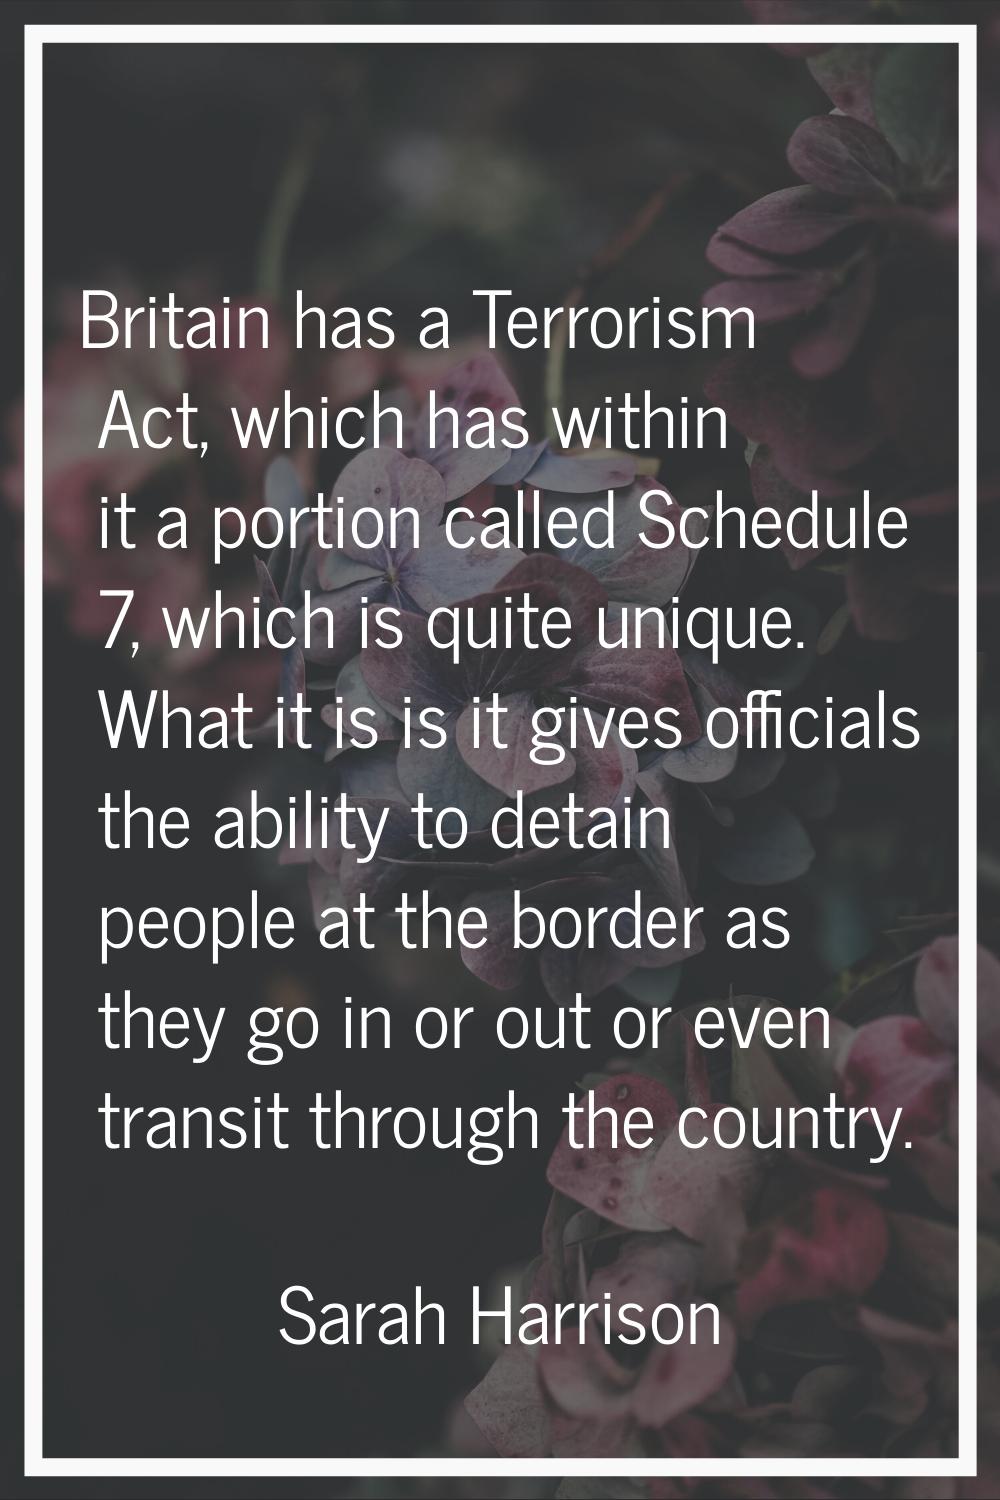 Britain has a Terrorism Act, which has within it a portion called Schedule 7, which is quite unique